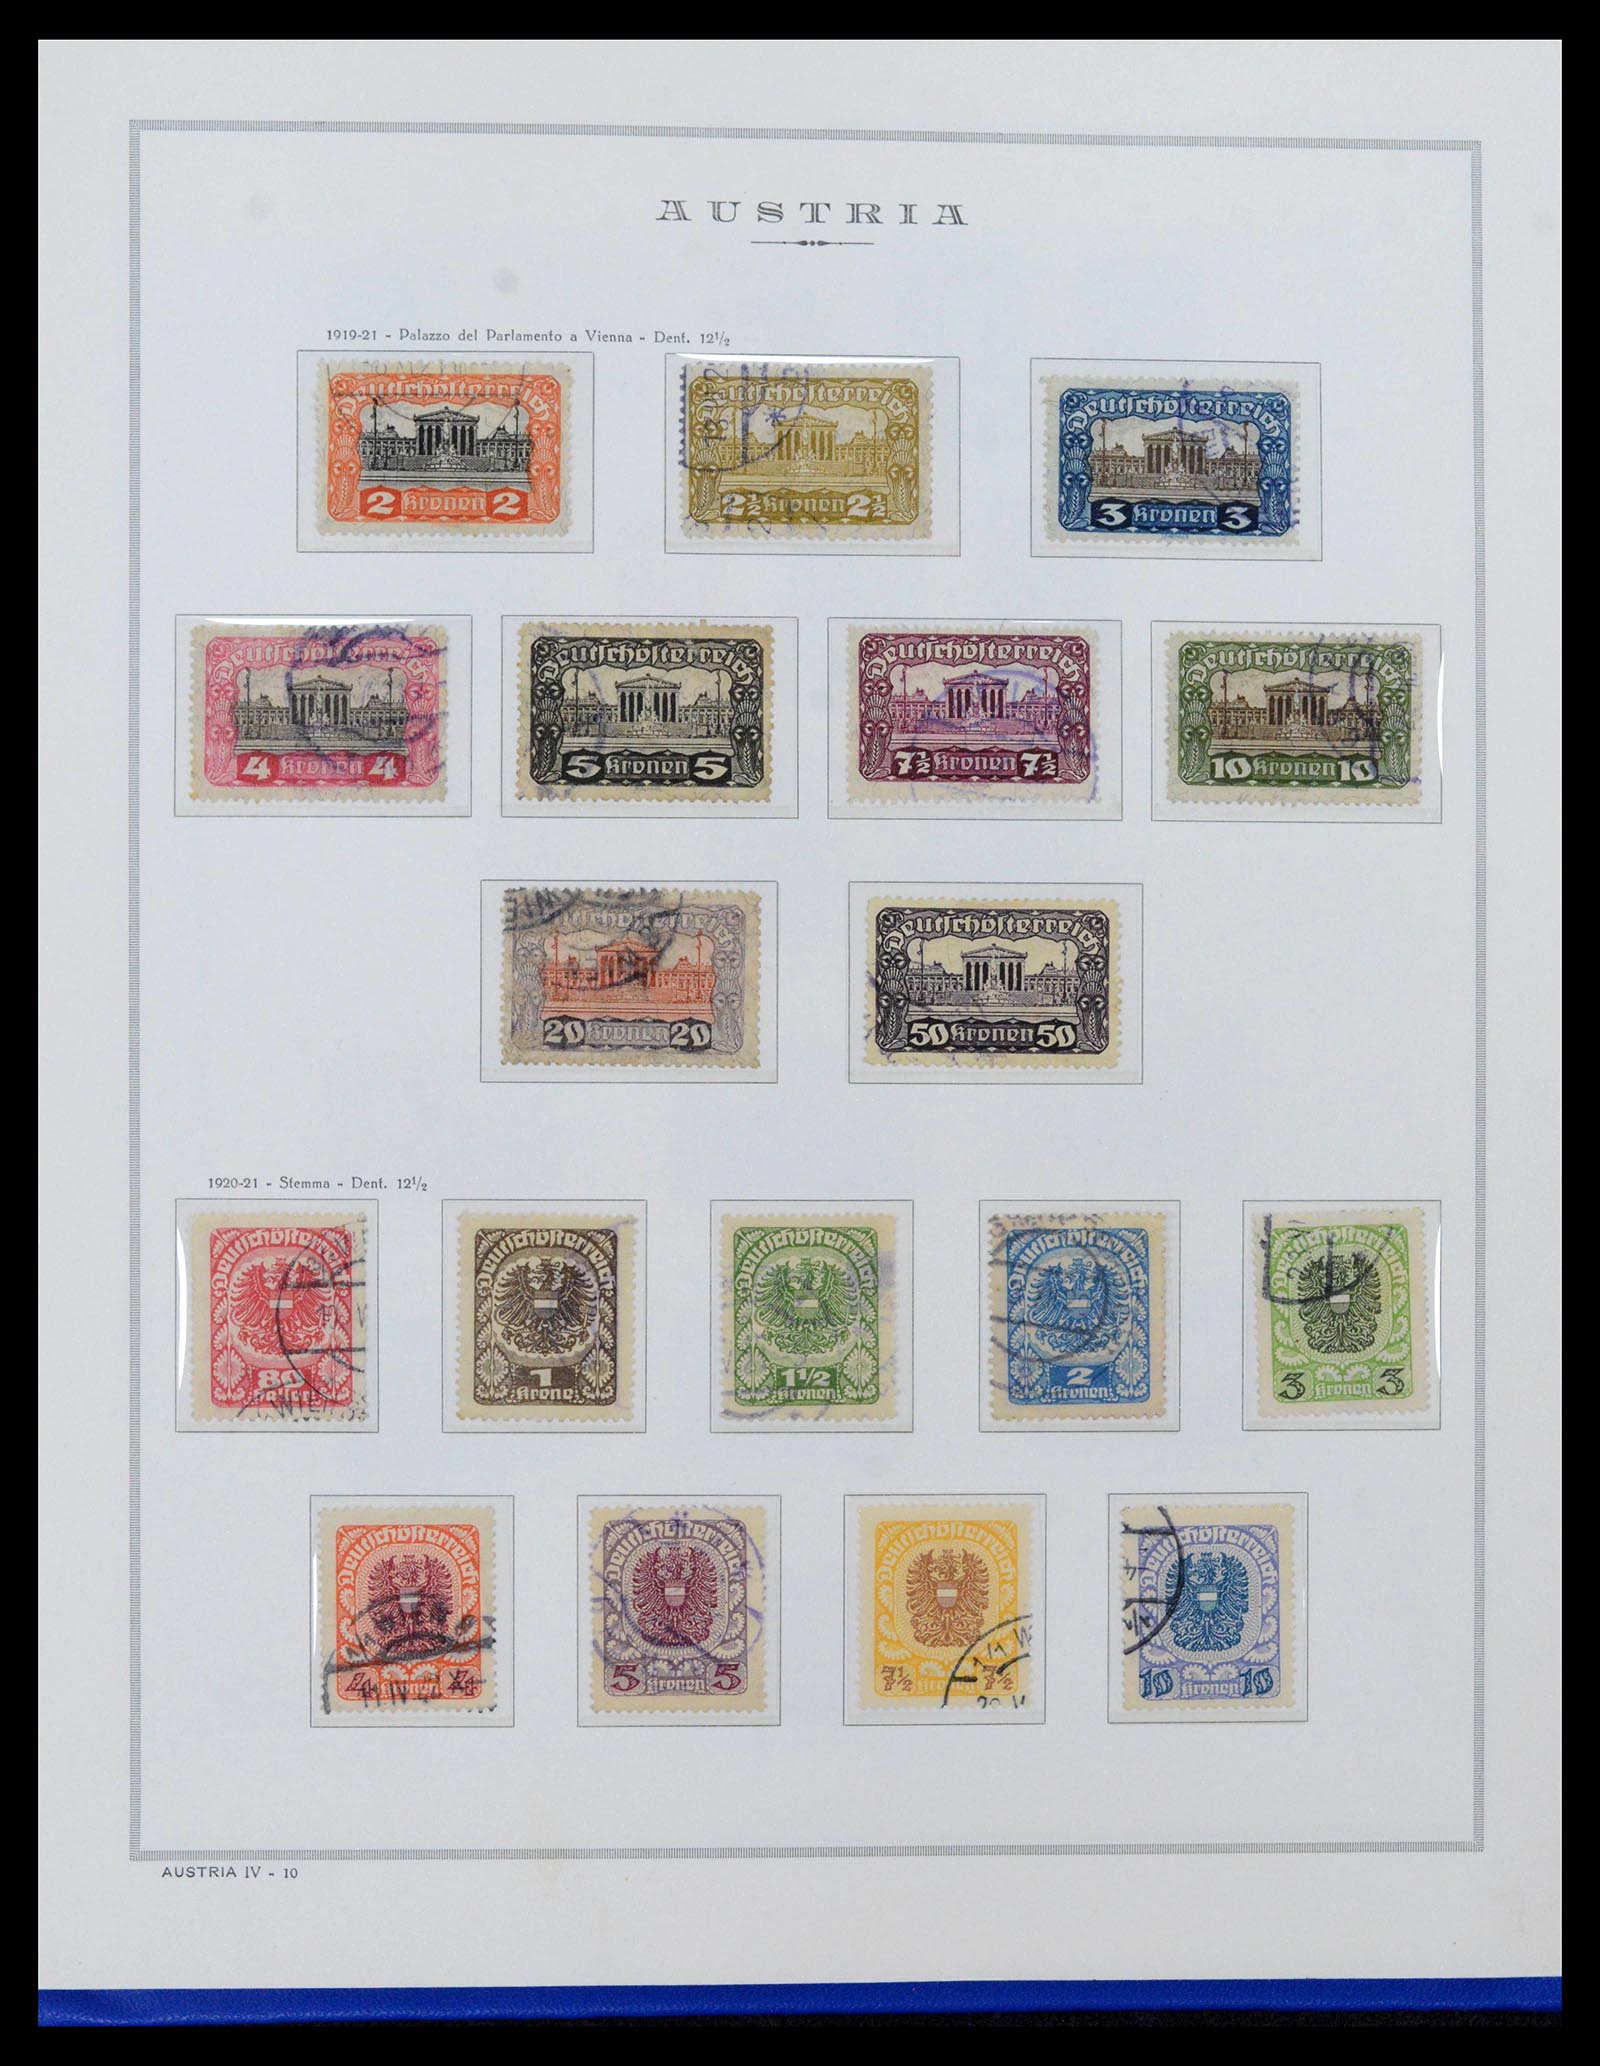 39038 0020 - Stamp collection 39038 Austria 1850-1950.